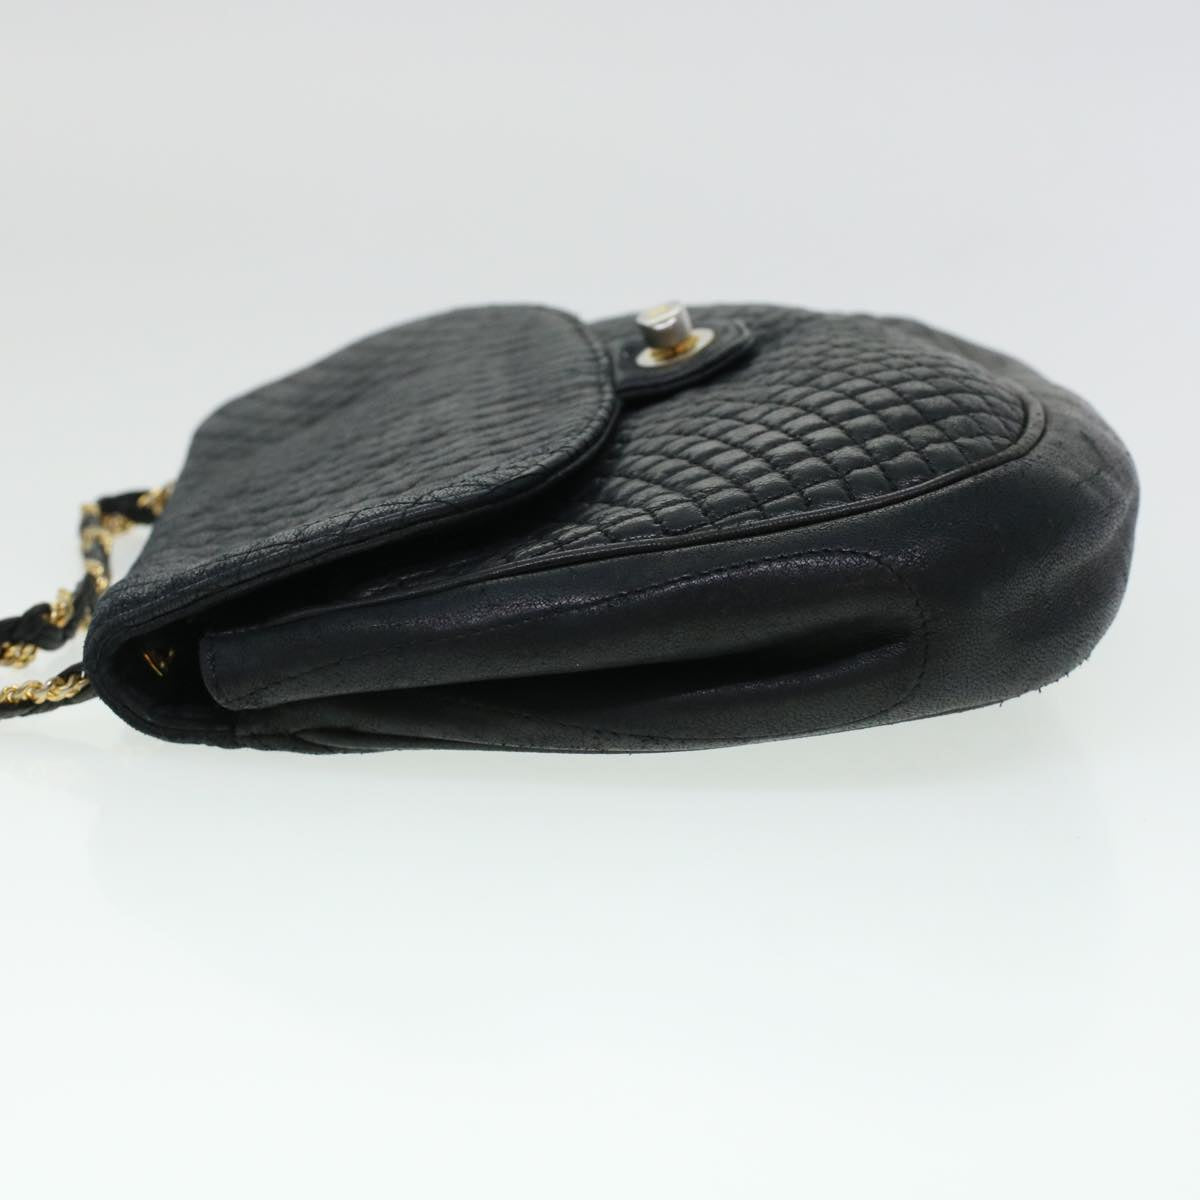 BALLY Quilted Shoulder Bag Leather Black Auth yb136